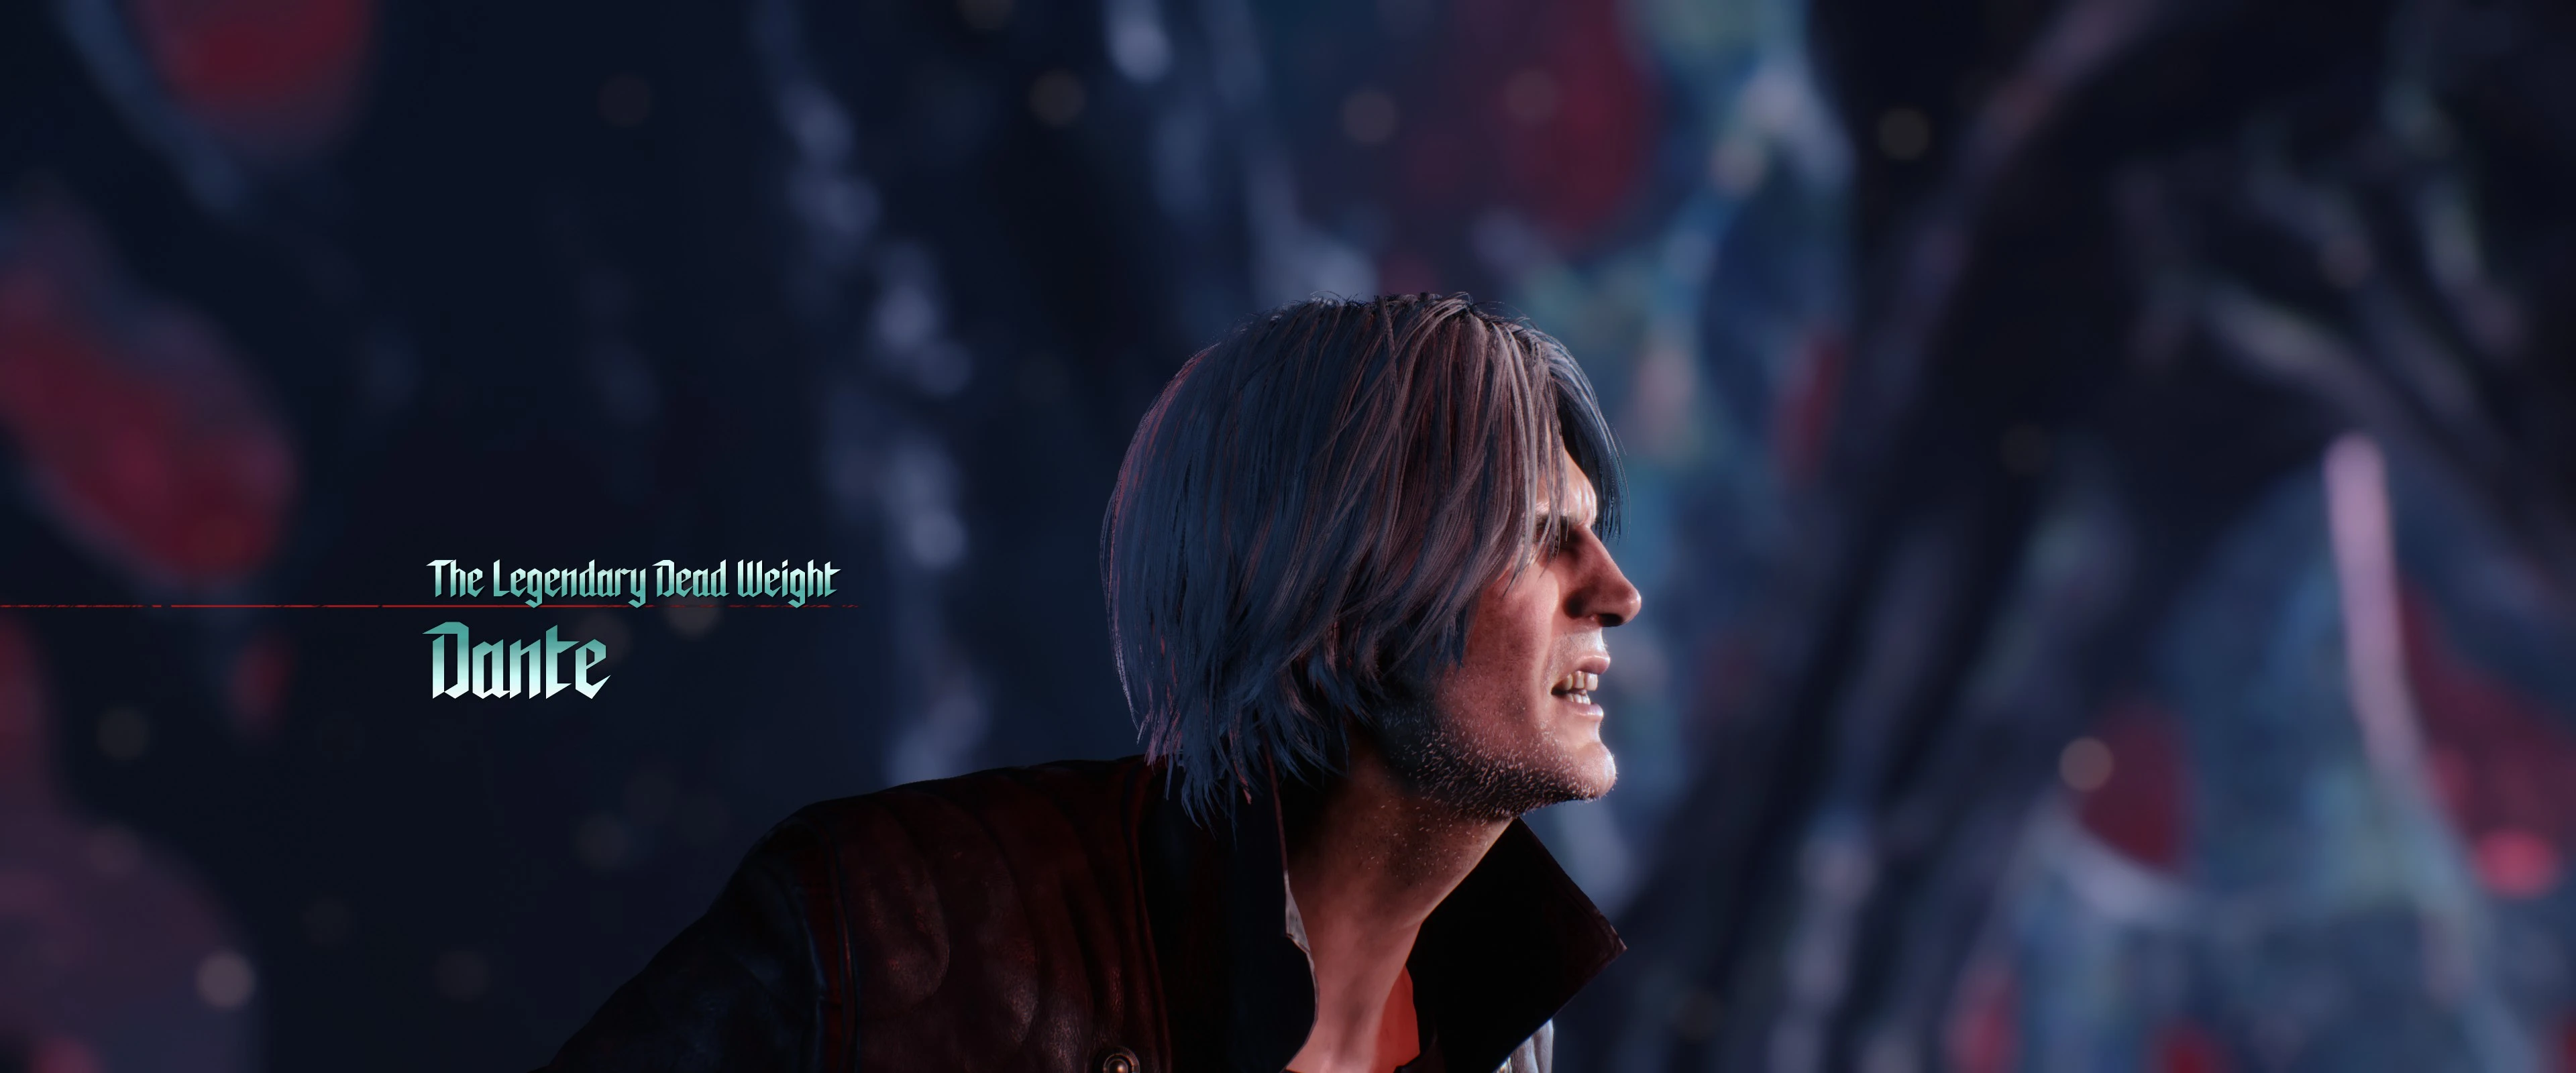 The Dead Weight and Other Character Titles at Devil May Cry 5 Nexus - Mods  and community